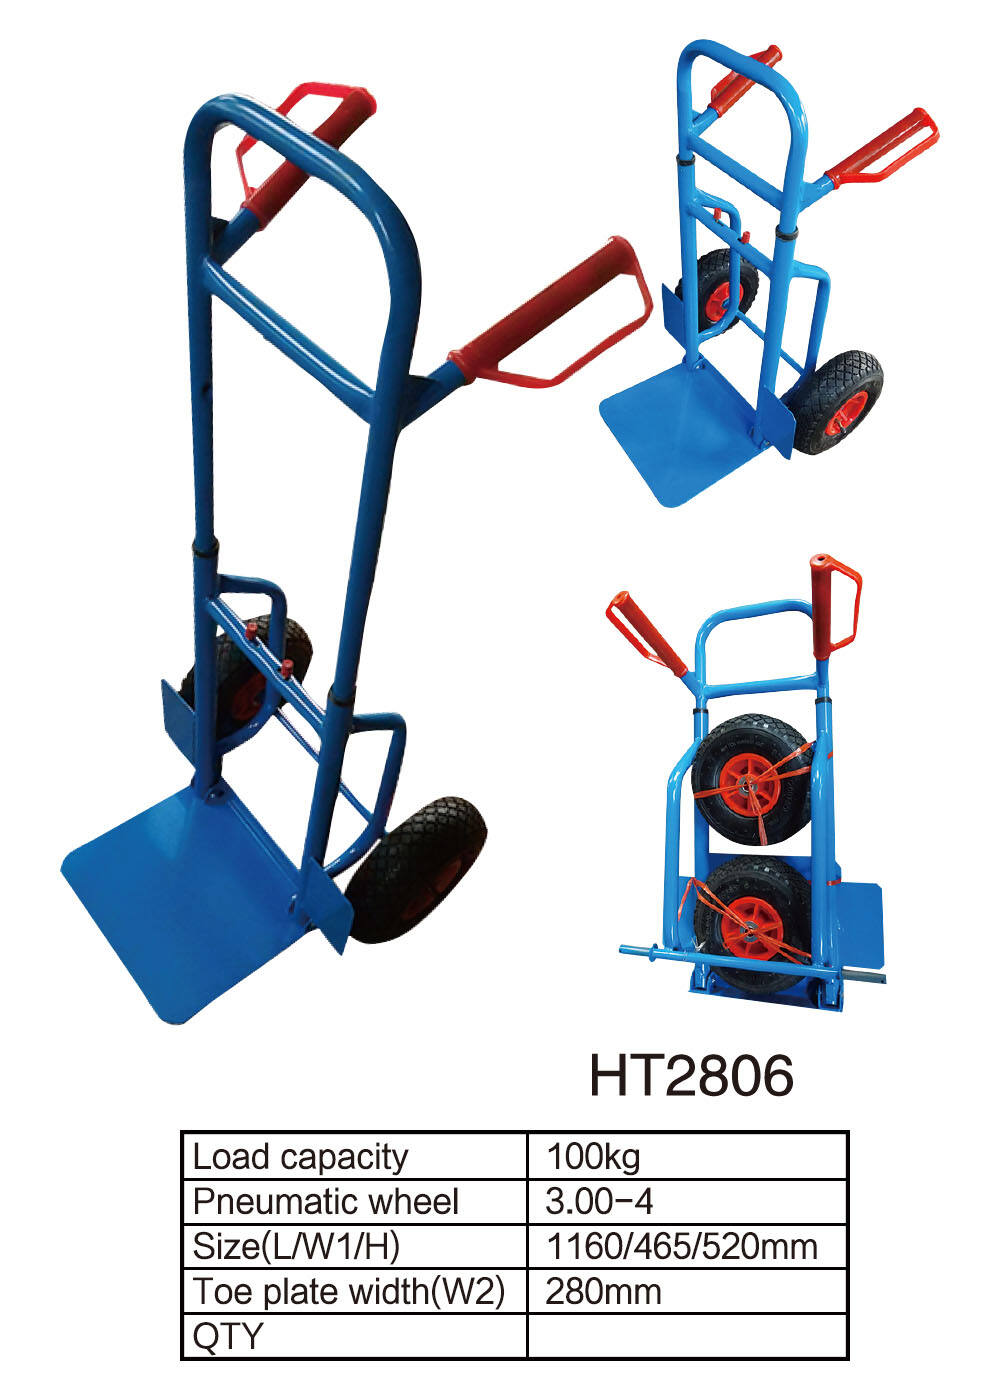 HT2806 Steel Hand Truck, Hand Cart Trolley Dolly, with 3.00-4 Pneumatic Wheel factory